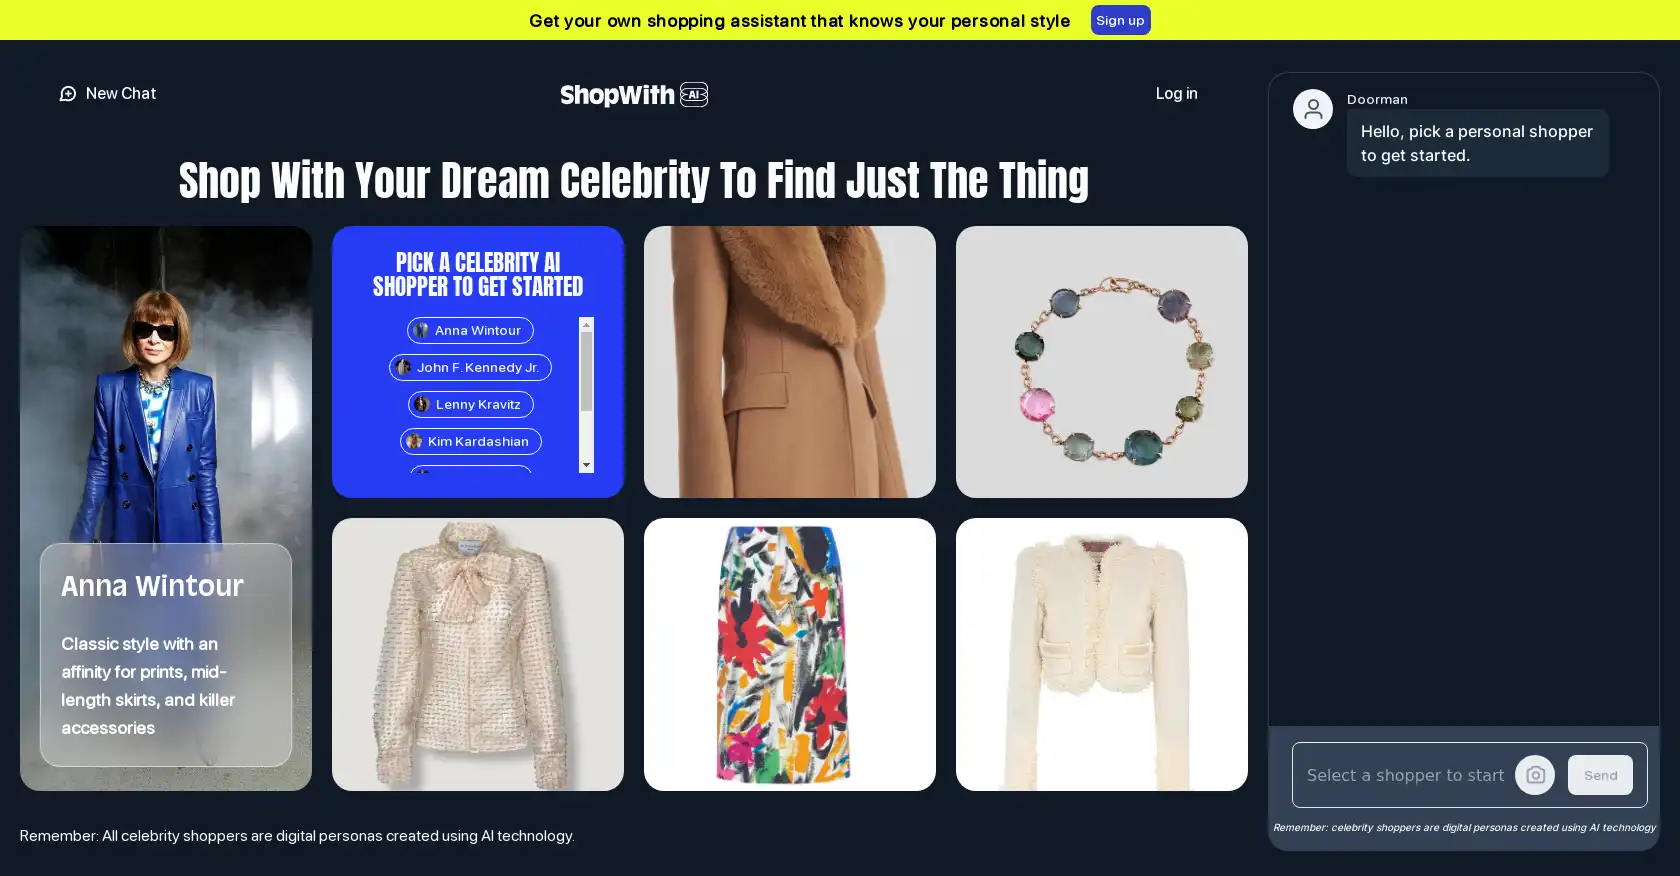 Go Shop With AI - AI tool for Personalized recommendations, Virtual stylist, Fashion AI, Style matching, Smart shopping